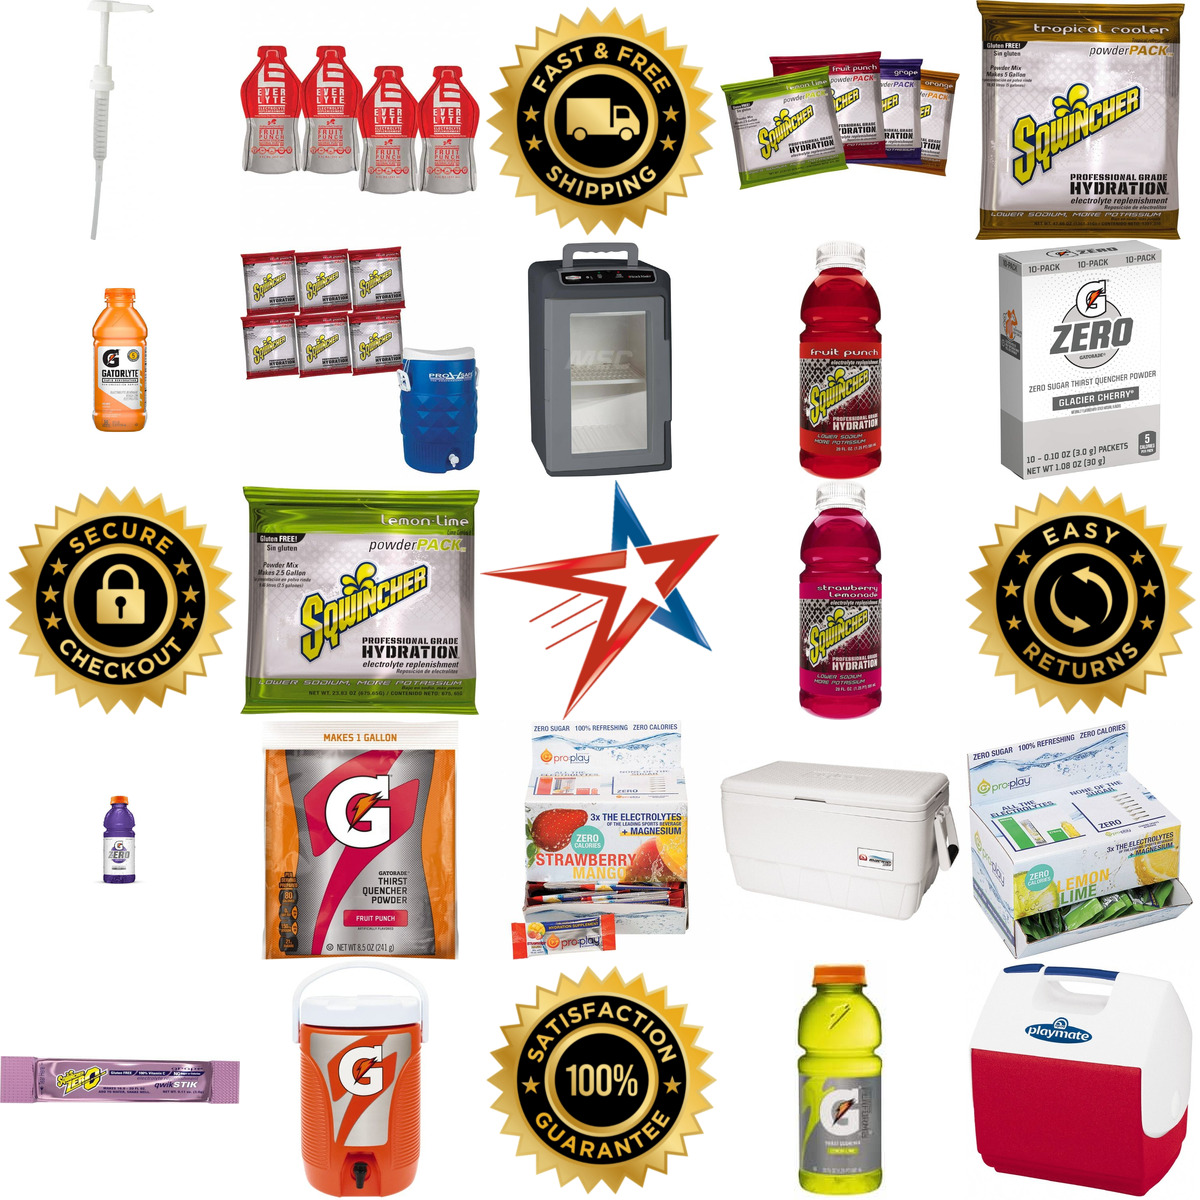 A selection of Hydration and Portable Coolers products on GoVets